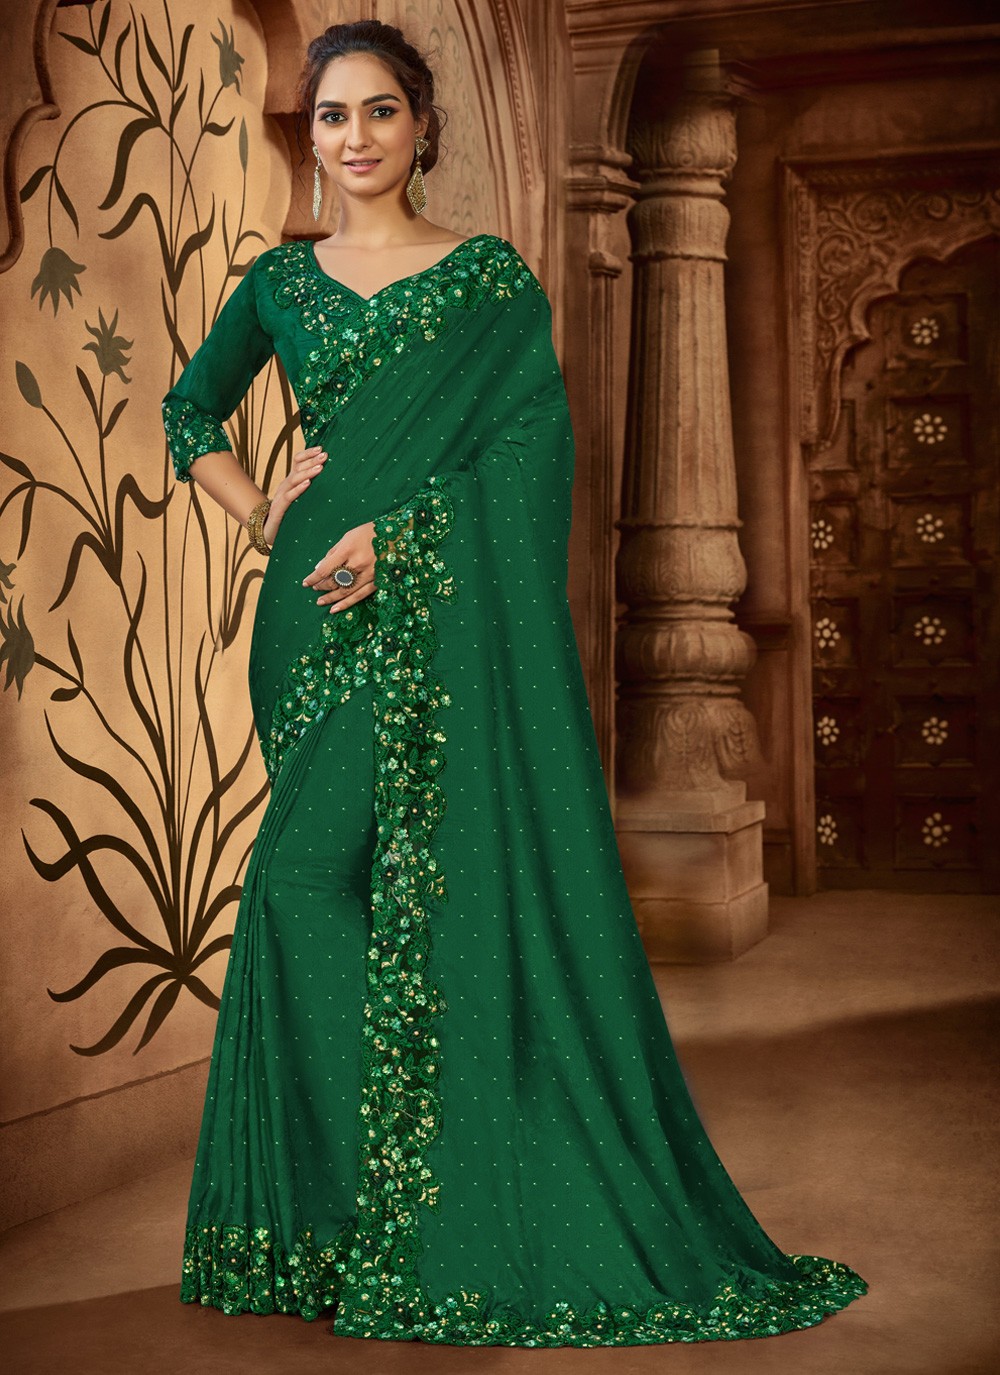 Traditional Saree Look With Green Color Cotton Silk